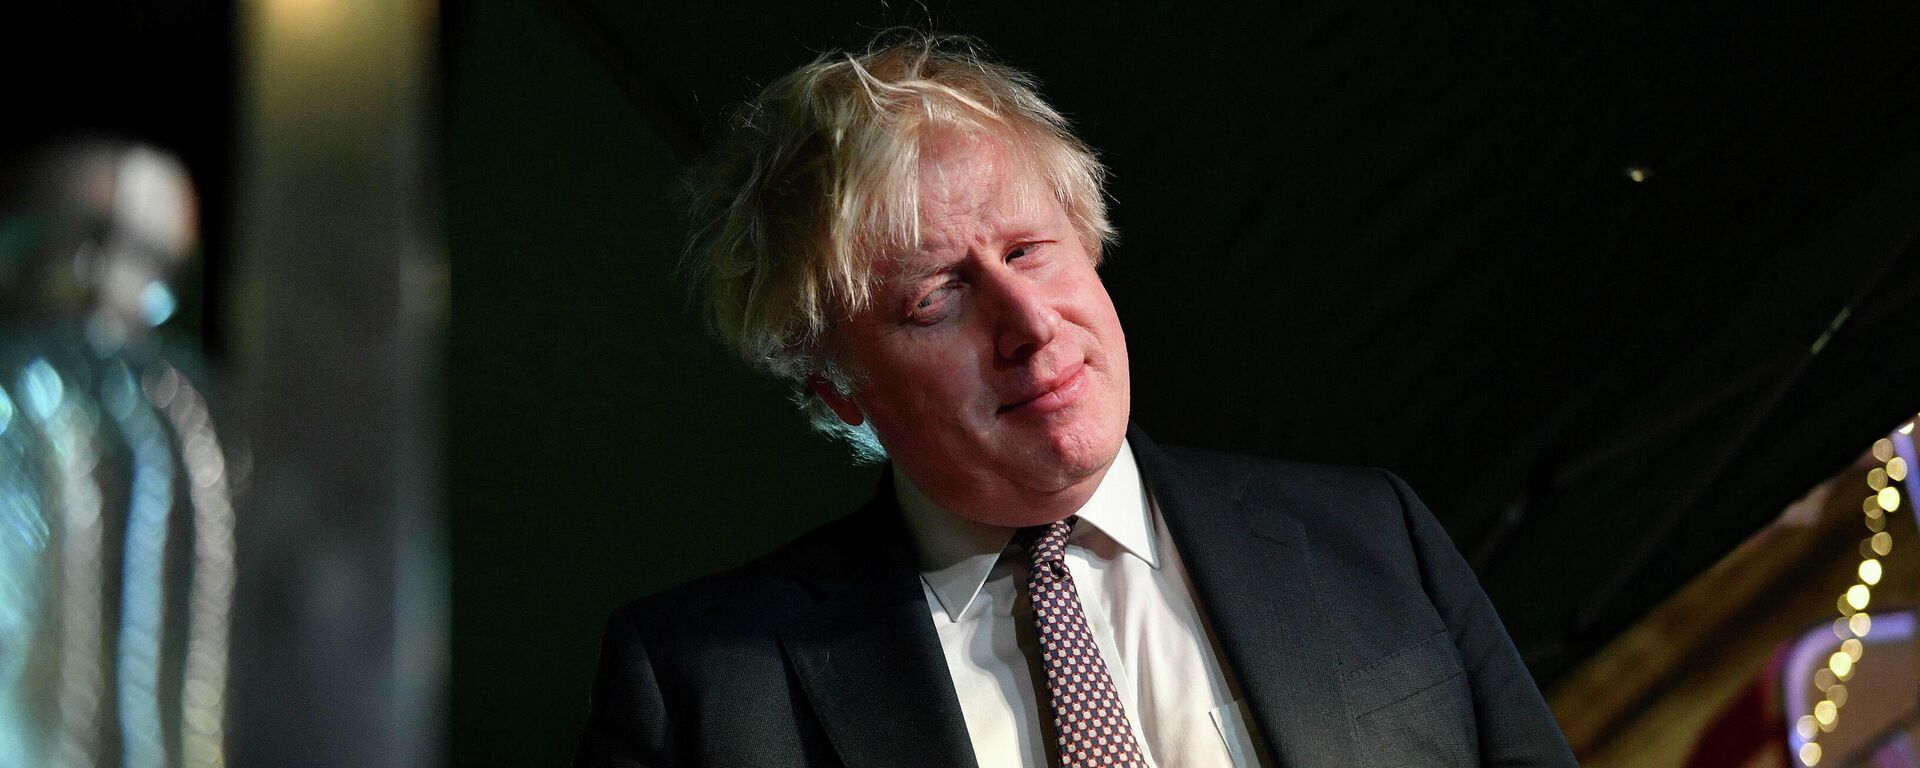 Britain's Prime Minister Boris Johnson samples an Isle of Harris gin as he visits a UK Food and Drinks market, set up in Downing Street, London, Tuesday Nov. 30, 2021 - Sputnik International, 1920, 28.01.2022